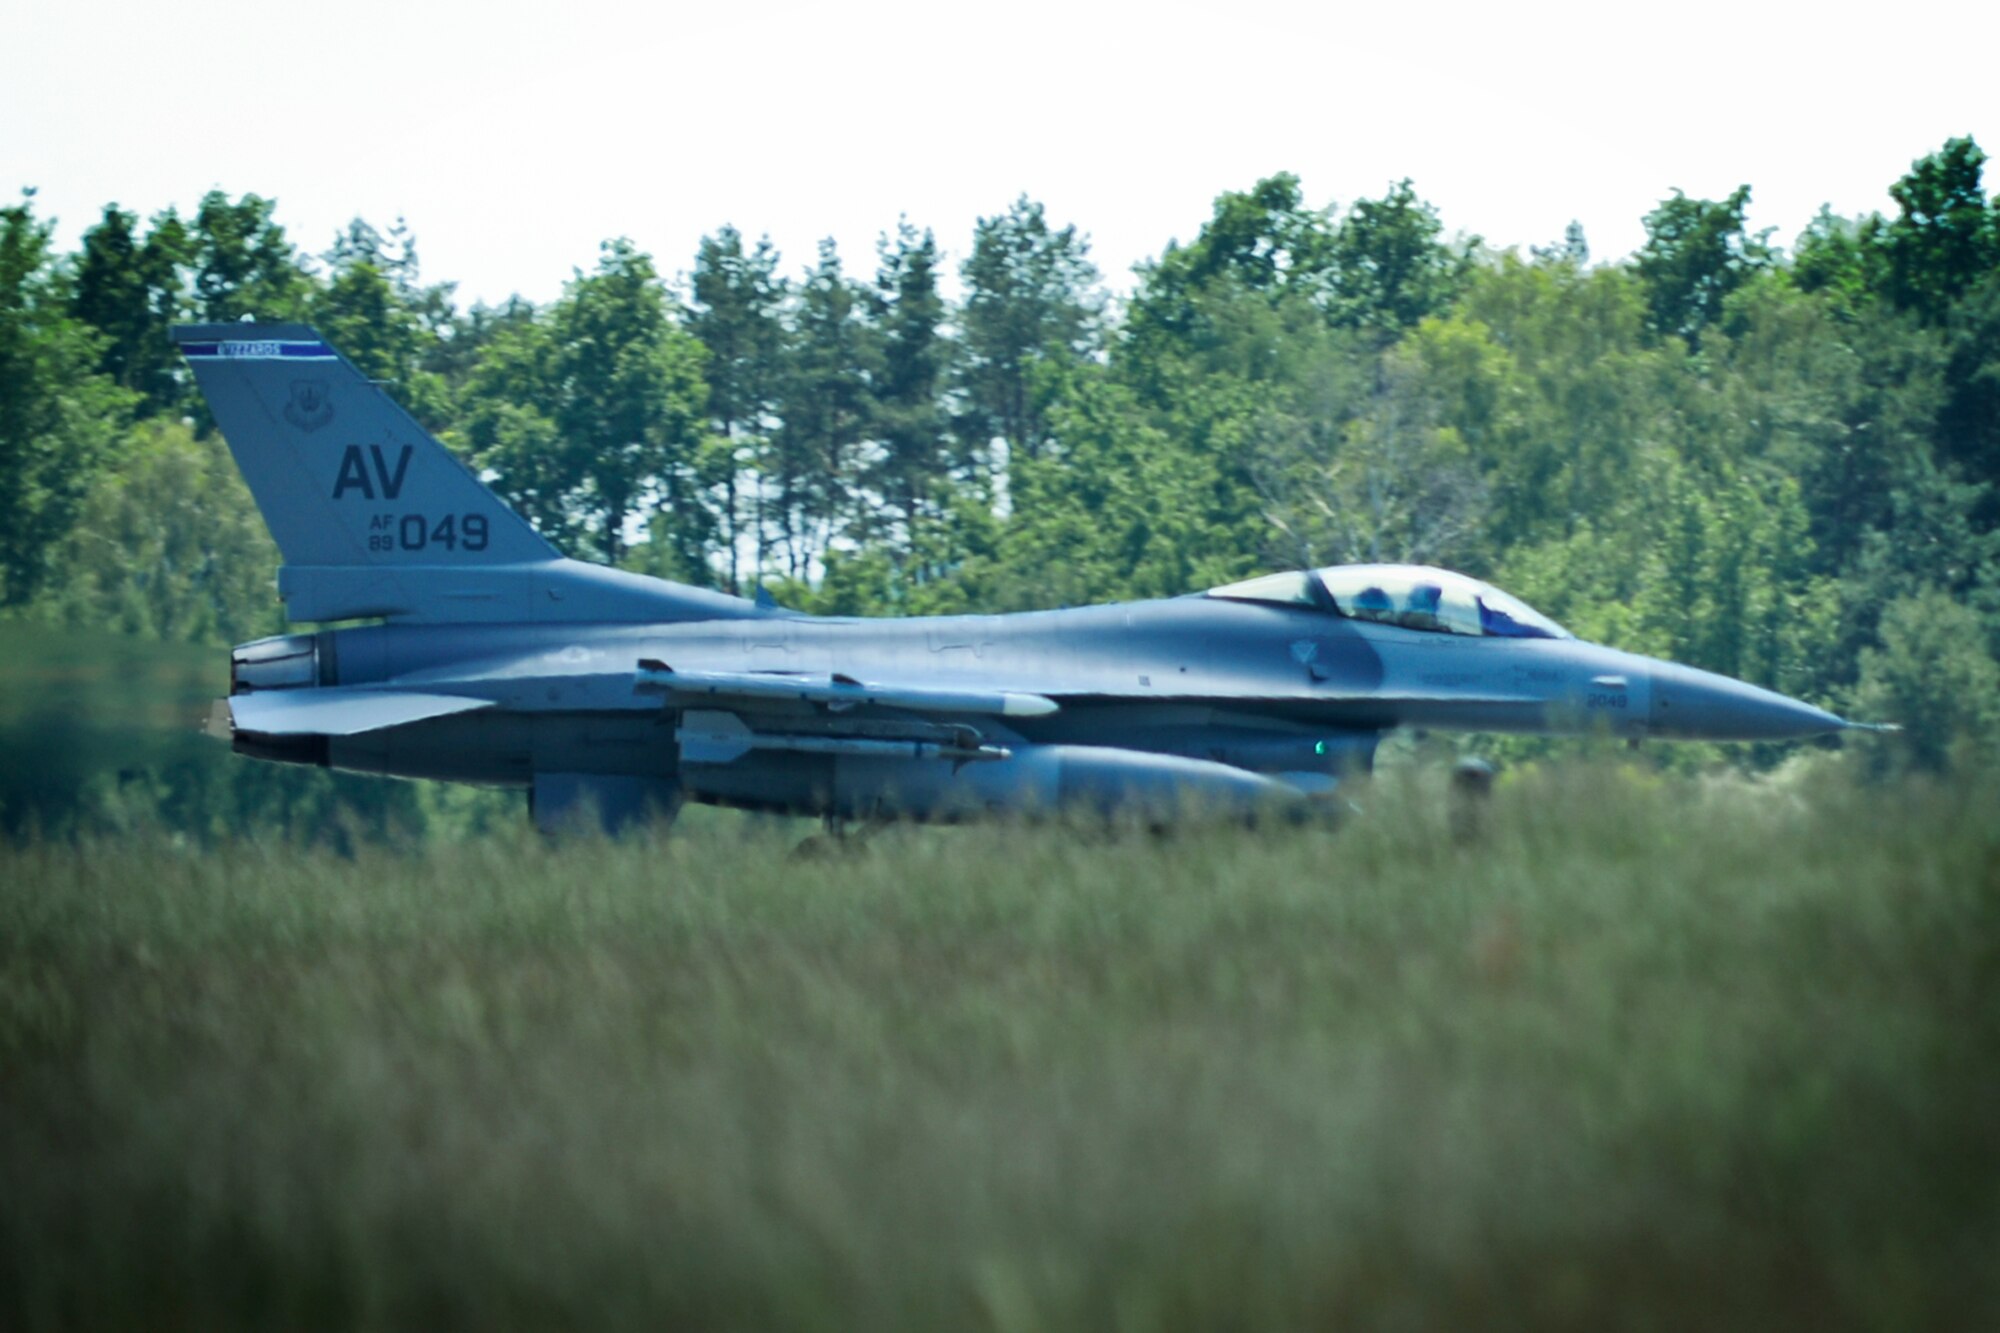 An F-16 Fighting Falcon from the 31st Fighter Wing, Aviano Air Base, Italy, takes off for a sortie during Aviation Detachment Rotation 16-3 at Lask Air Base, Poland, June 7, 2016. During the two-week training, approximately 350 personnel supporting 14 F-16s from the 31st Fighter Wing, Aviano Air Base, Italy and six F-16s from the 138th Fighter Wing, Tulsa Air National Guard, Okla., will conduct bilateral flying training focused on improving familiarization with operational and logistical processes, maintaining joint readiness and building interoperability capabilities between the Polish and U.S. air forces. (U.S. Air Force photo/Senior Airman Erin Babis)